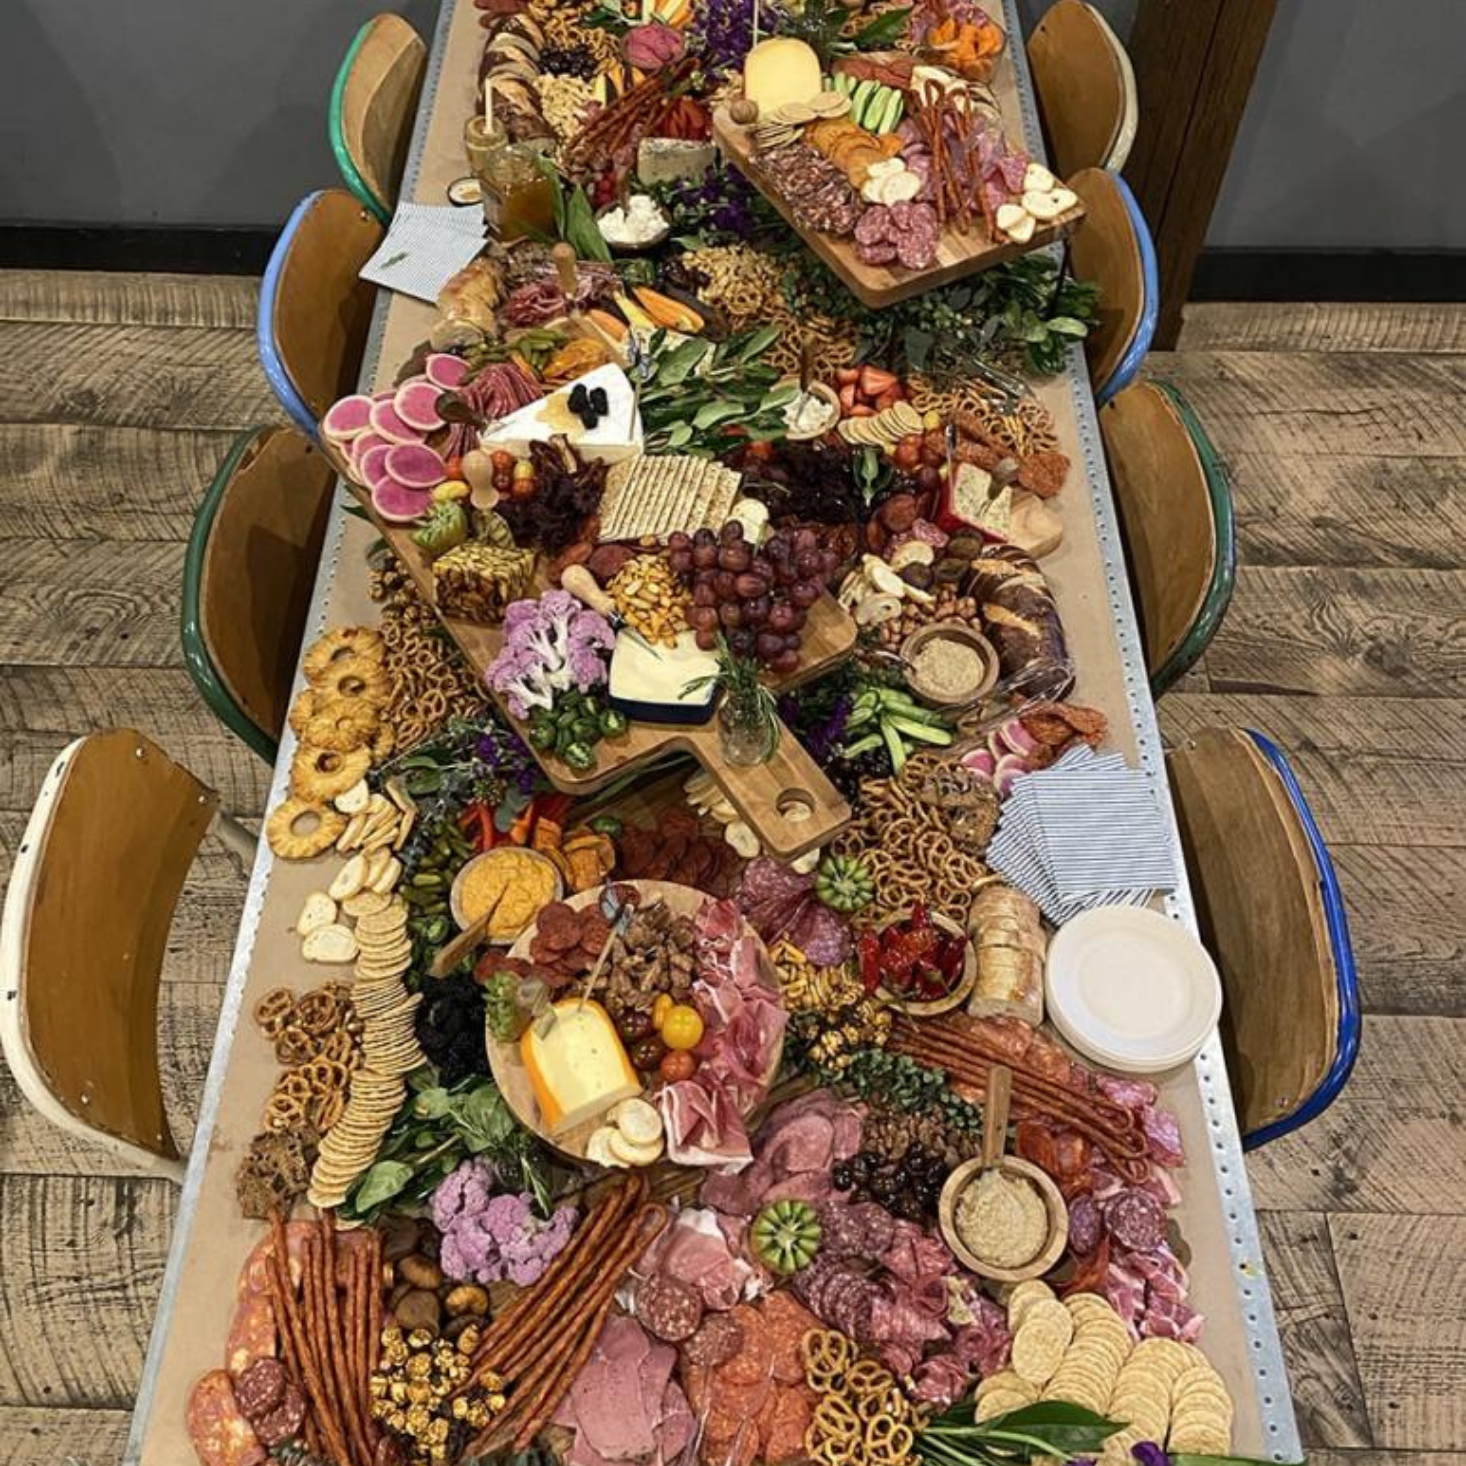 Charcuterie grazing table